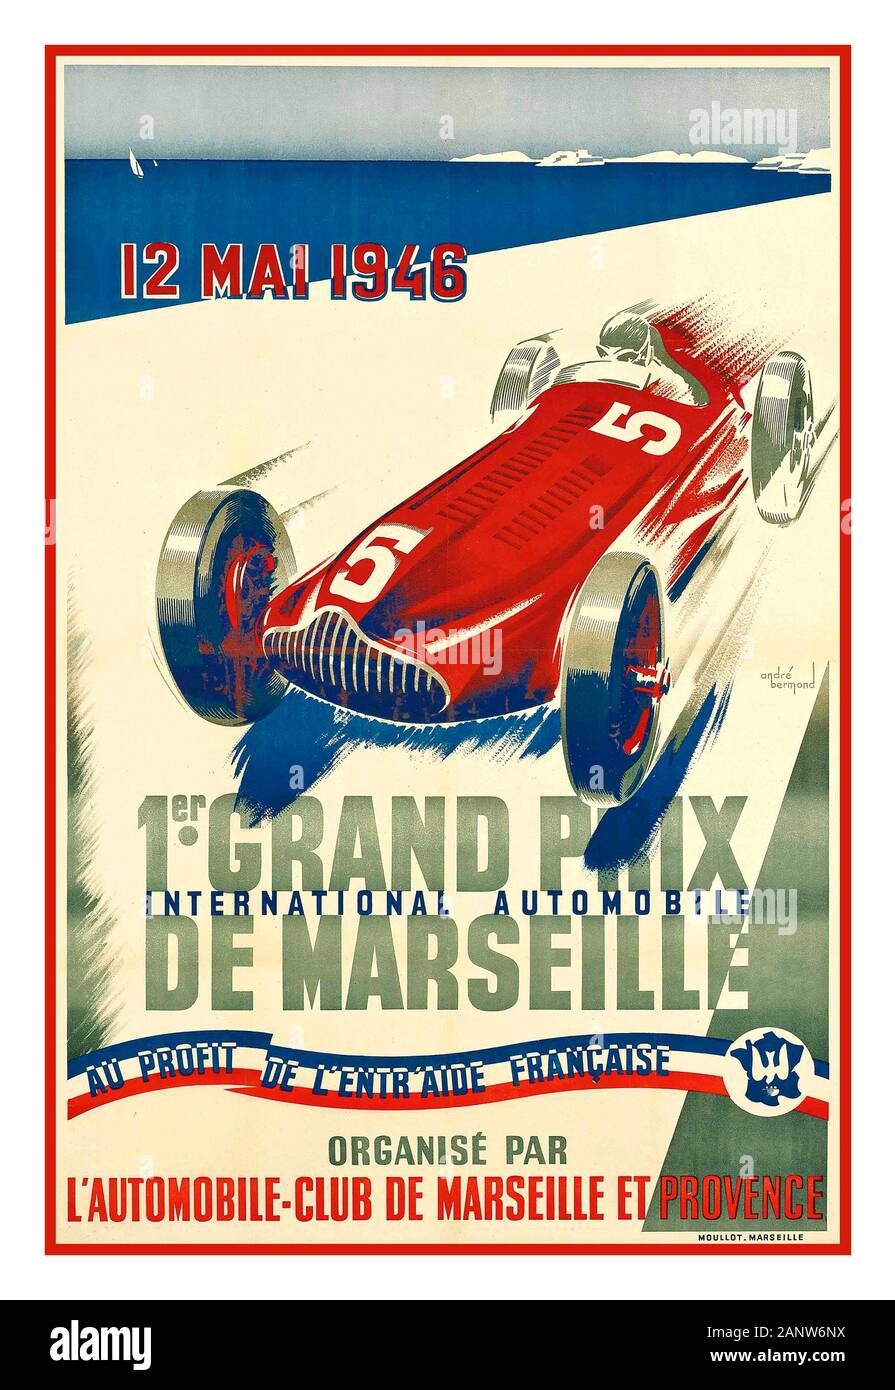 Vintage 1940's Grand Prix de Marseille motor racing poster 1er GRAND PRIX DE MARSEILLE Vintage 1946 advertising poster by Andre Bermond promoting the first Grand Prix held in Marseille, France and organized by the Marseille and Provence Automobile Club. lithograph in colours, 1946, printed by Moullot, Marseille, France Stock Photo